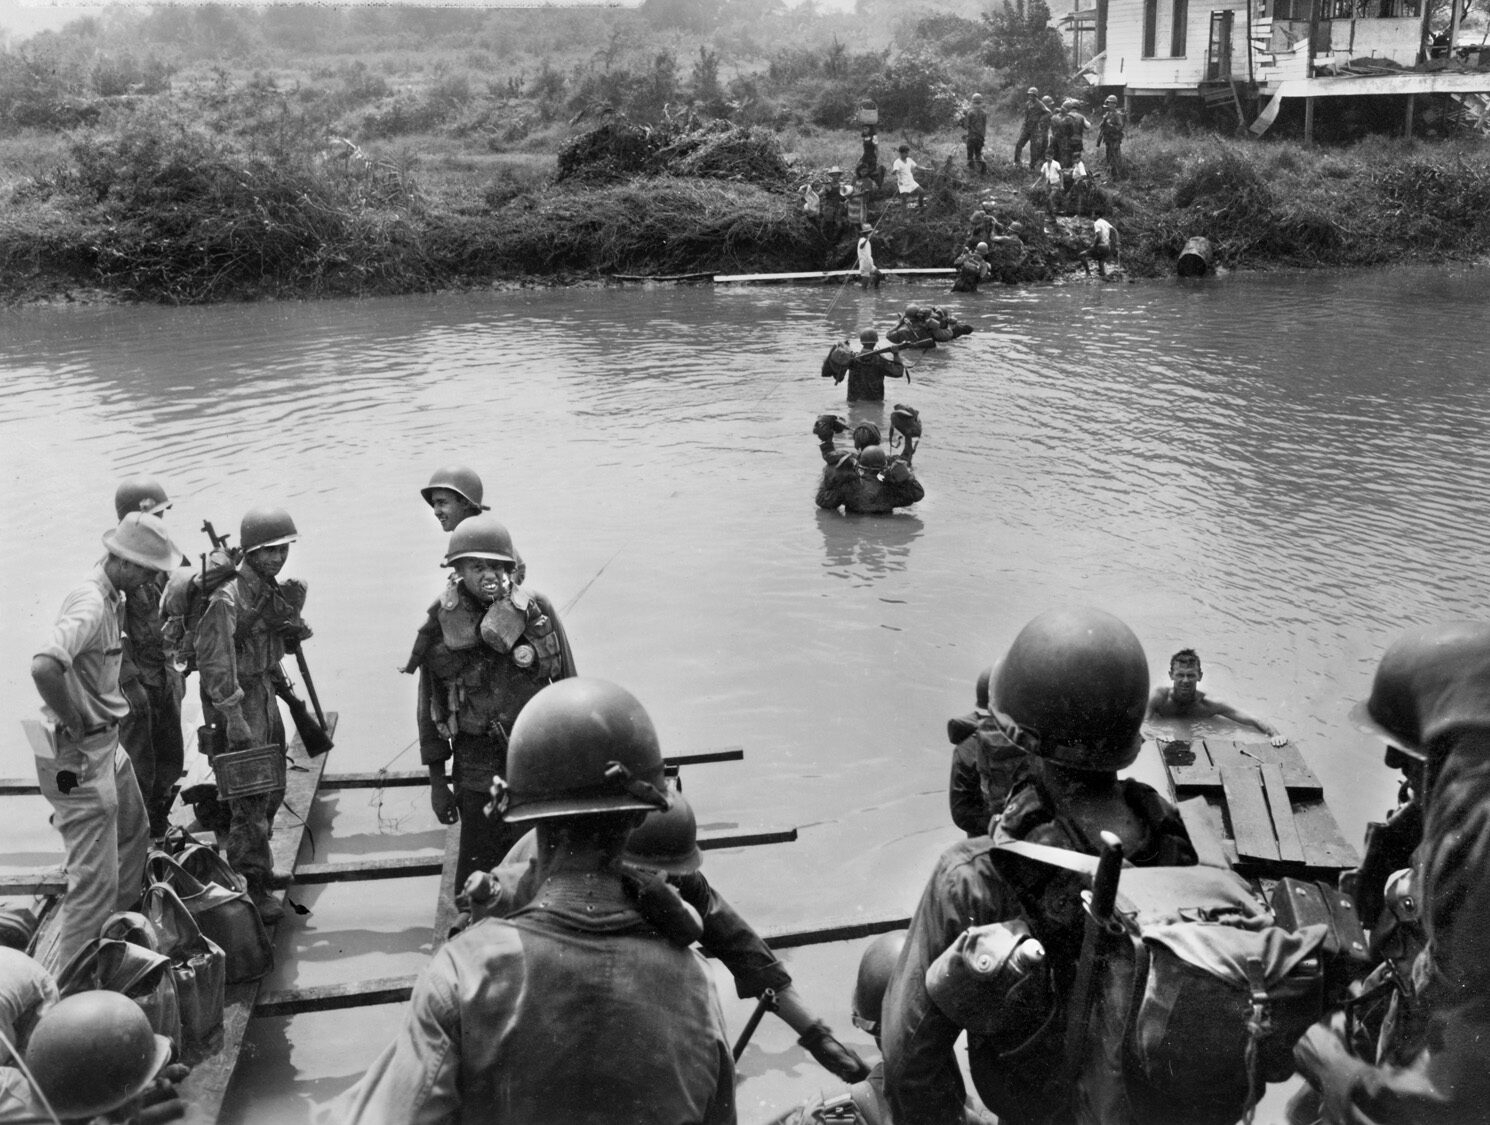 American soldiers of the 37th Infantry Division cross the Tuliahan River on February 4, 1945. Although the advance proceeded with all haste, pockets of Japanese resistance slowed the liberation of the city.